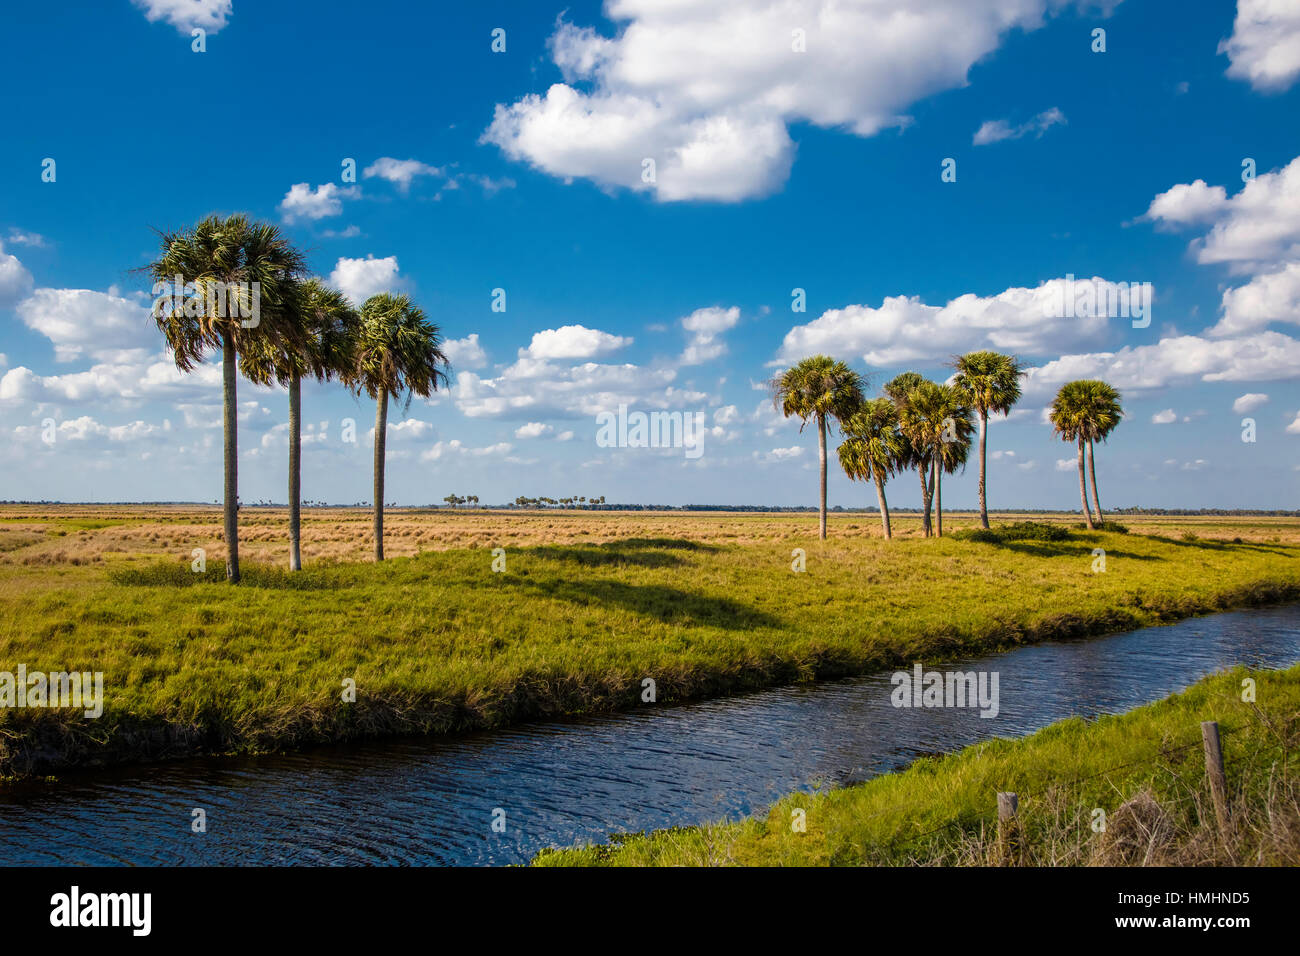 Palm trees across water canal in south central Florida Stock Photo